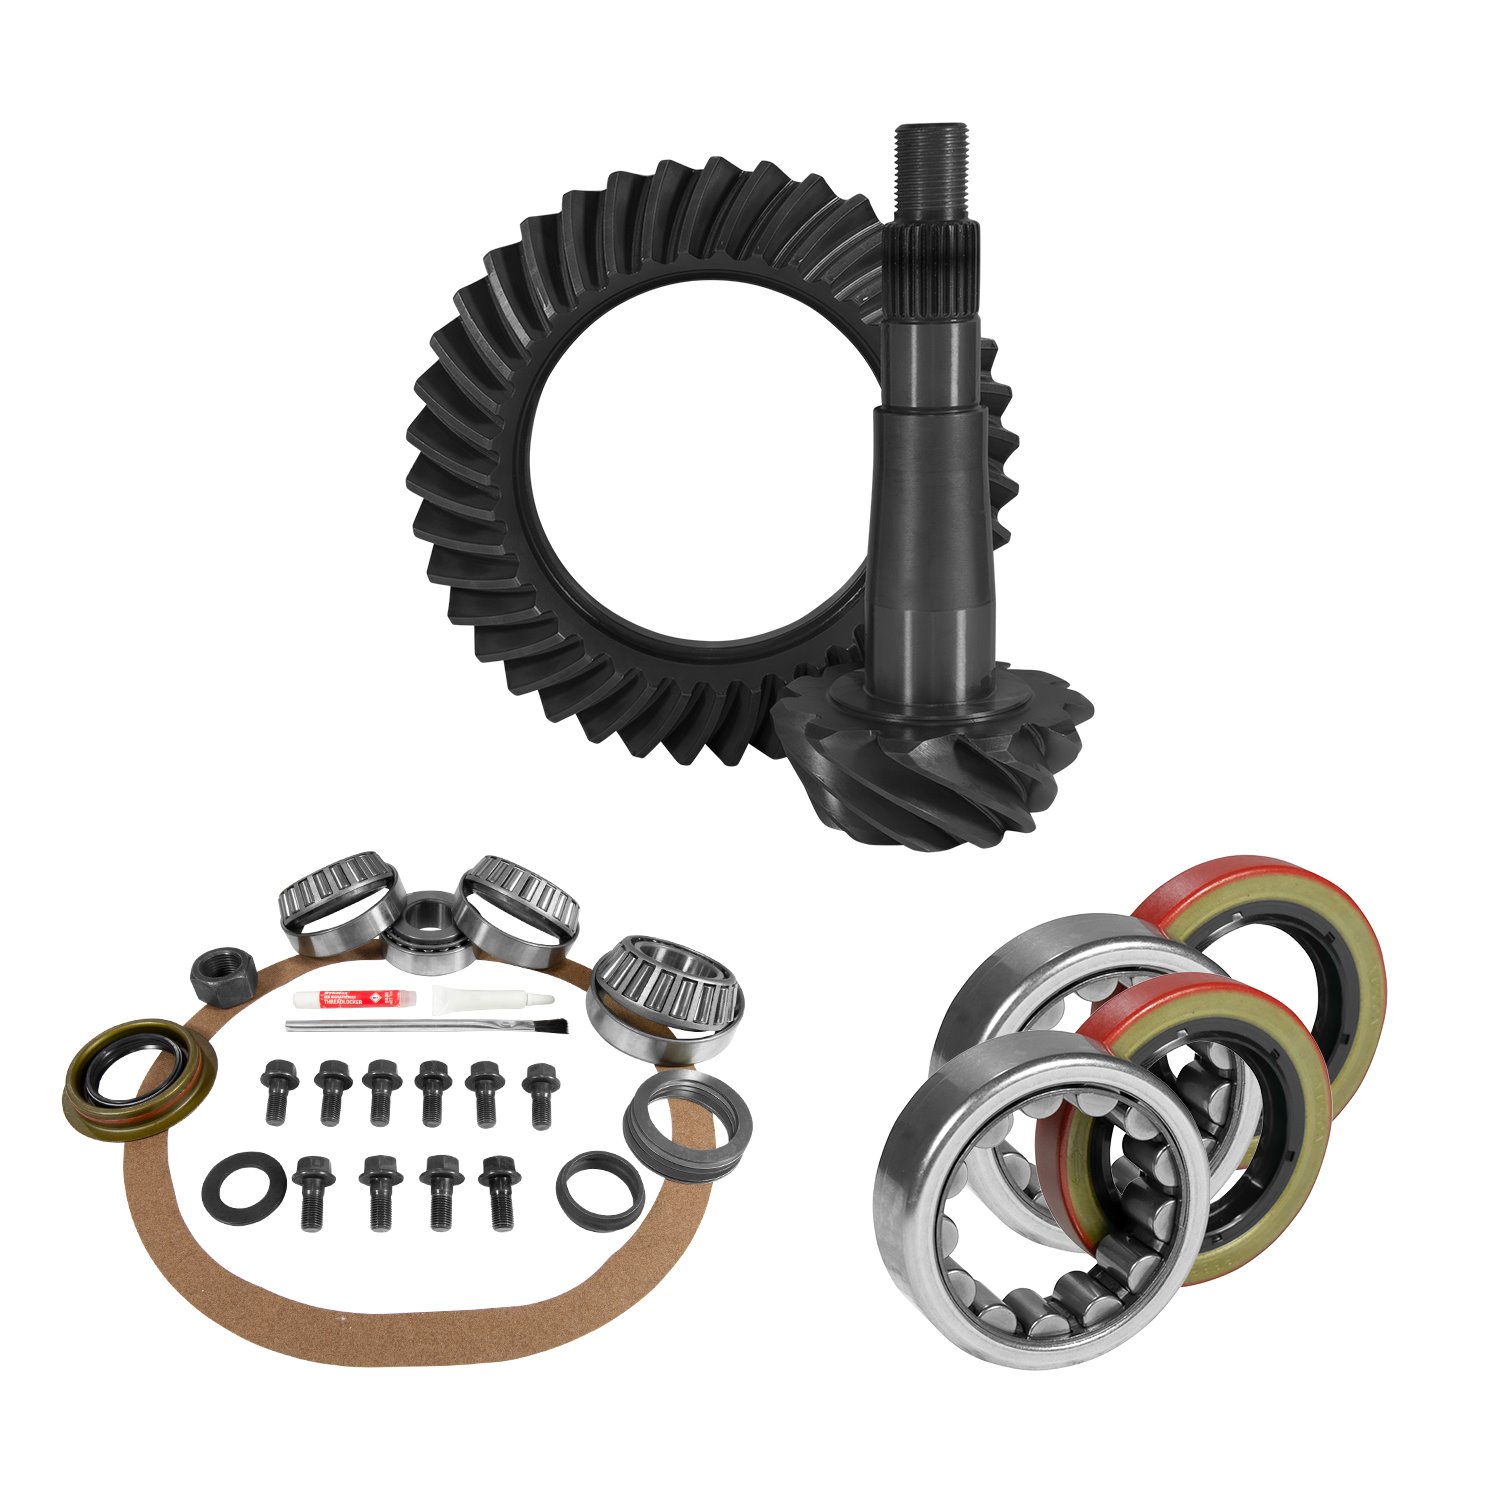 USA Standard 10898 8.25 in. Chy 3.07 Rear Ring & Pinion Install Kit, 1.618 in. Id Axle Bearings & Seals